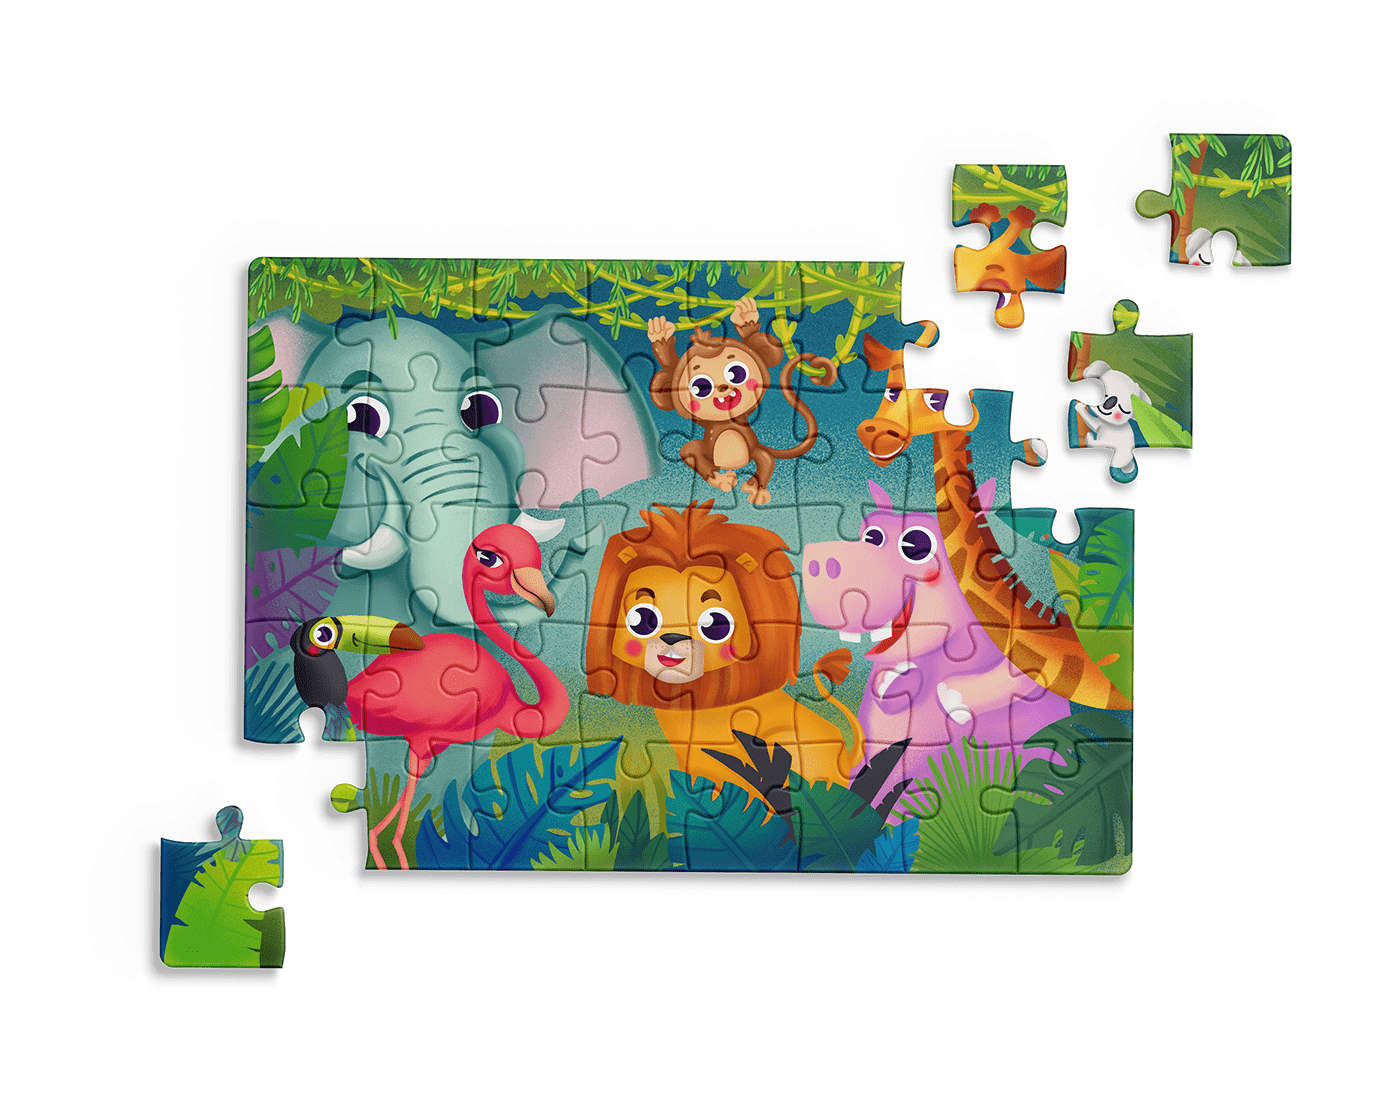 The illustrations are intended for puzzles,
 the illustrations depict various animals 
so that child